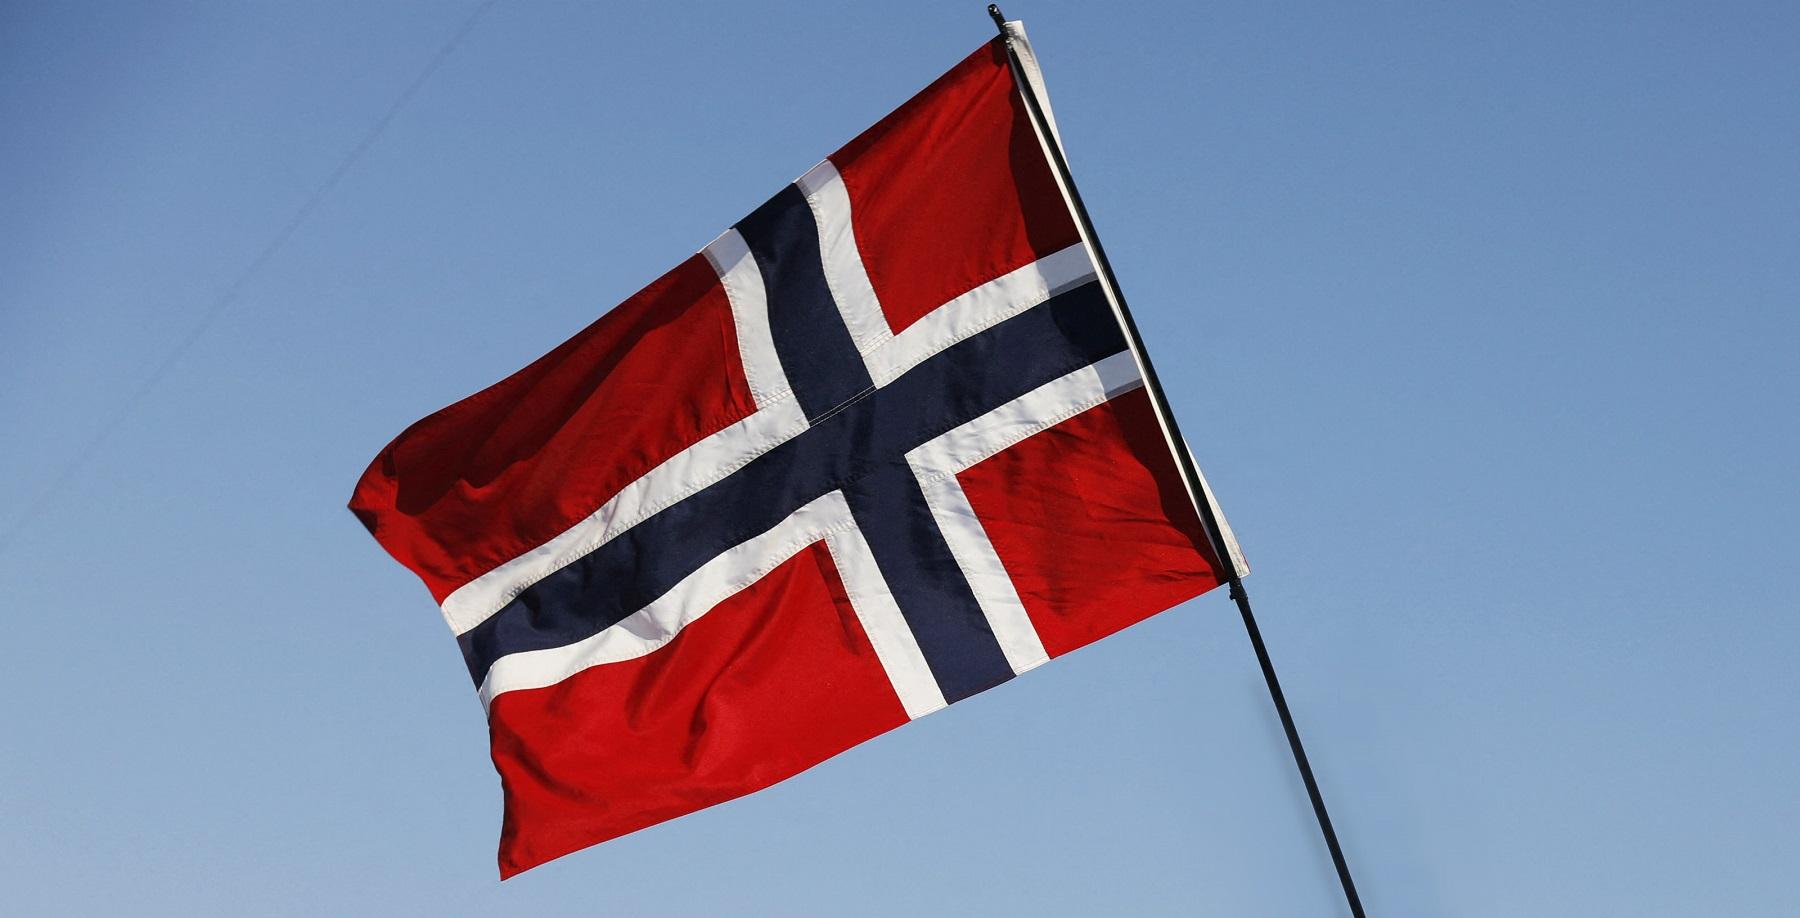 Norway”s parliament receives bomb threat